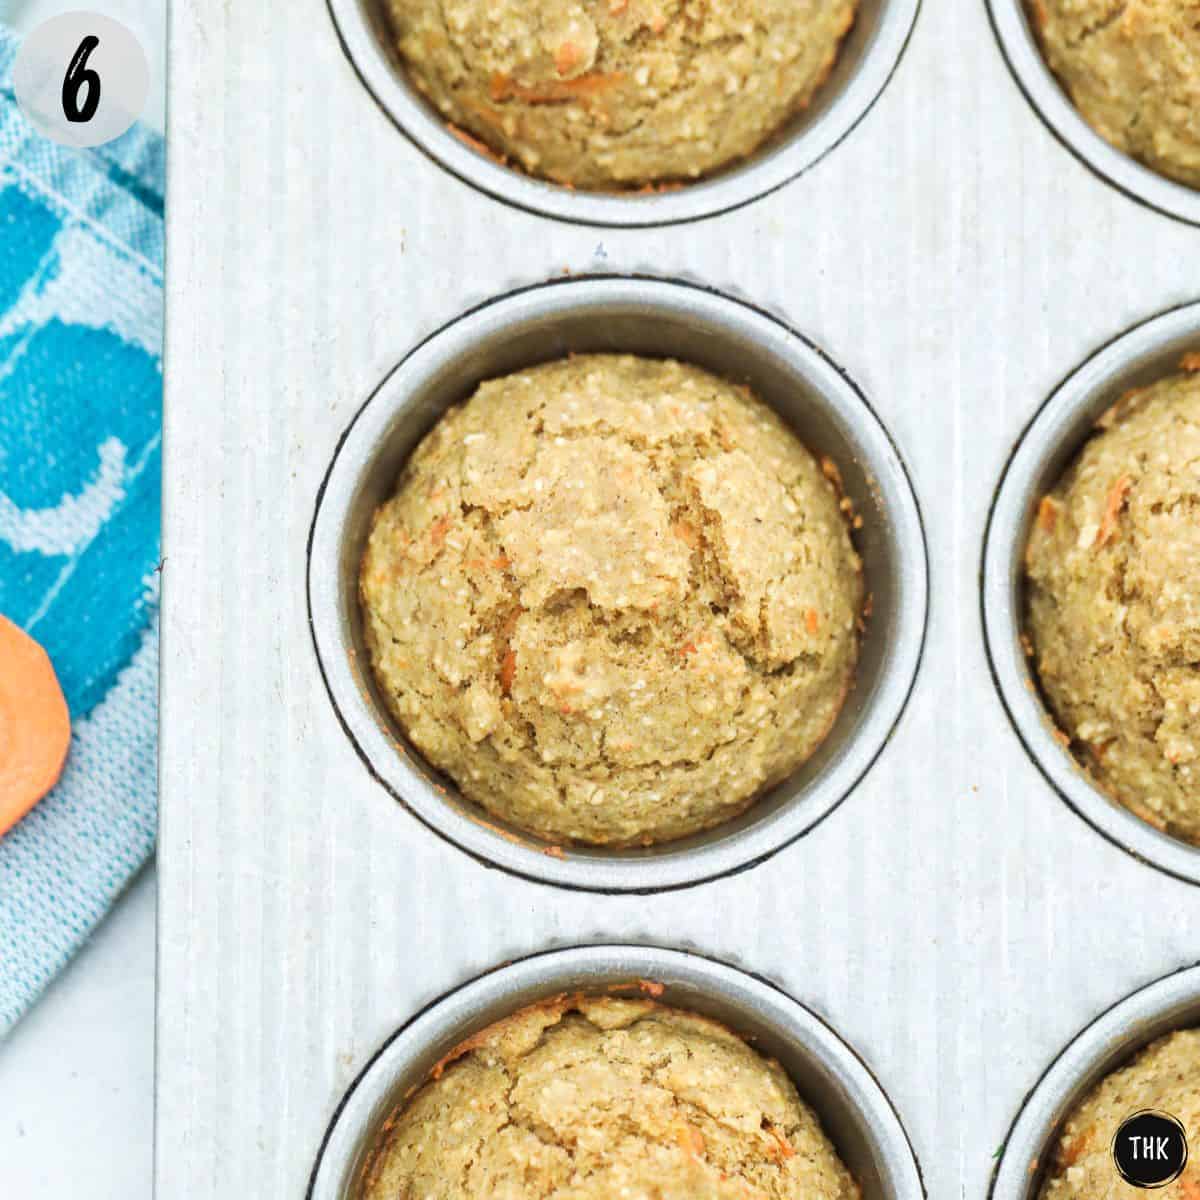 Baked muffins inside muffin tin.